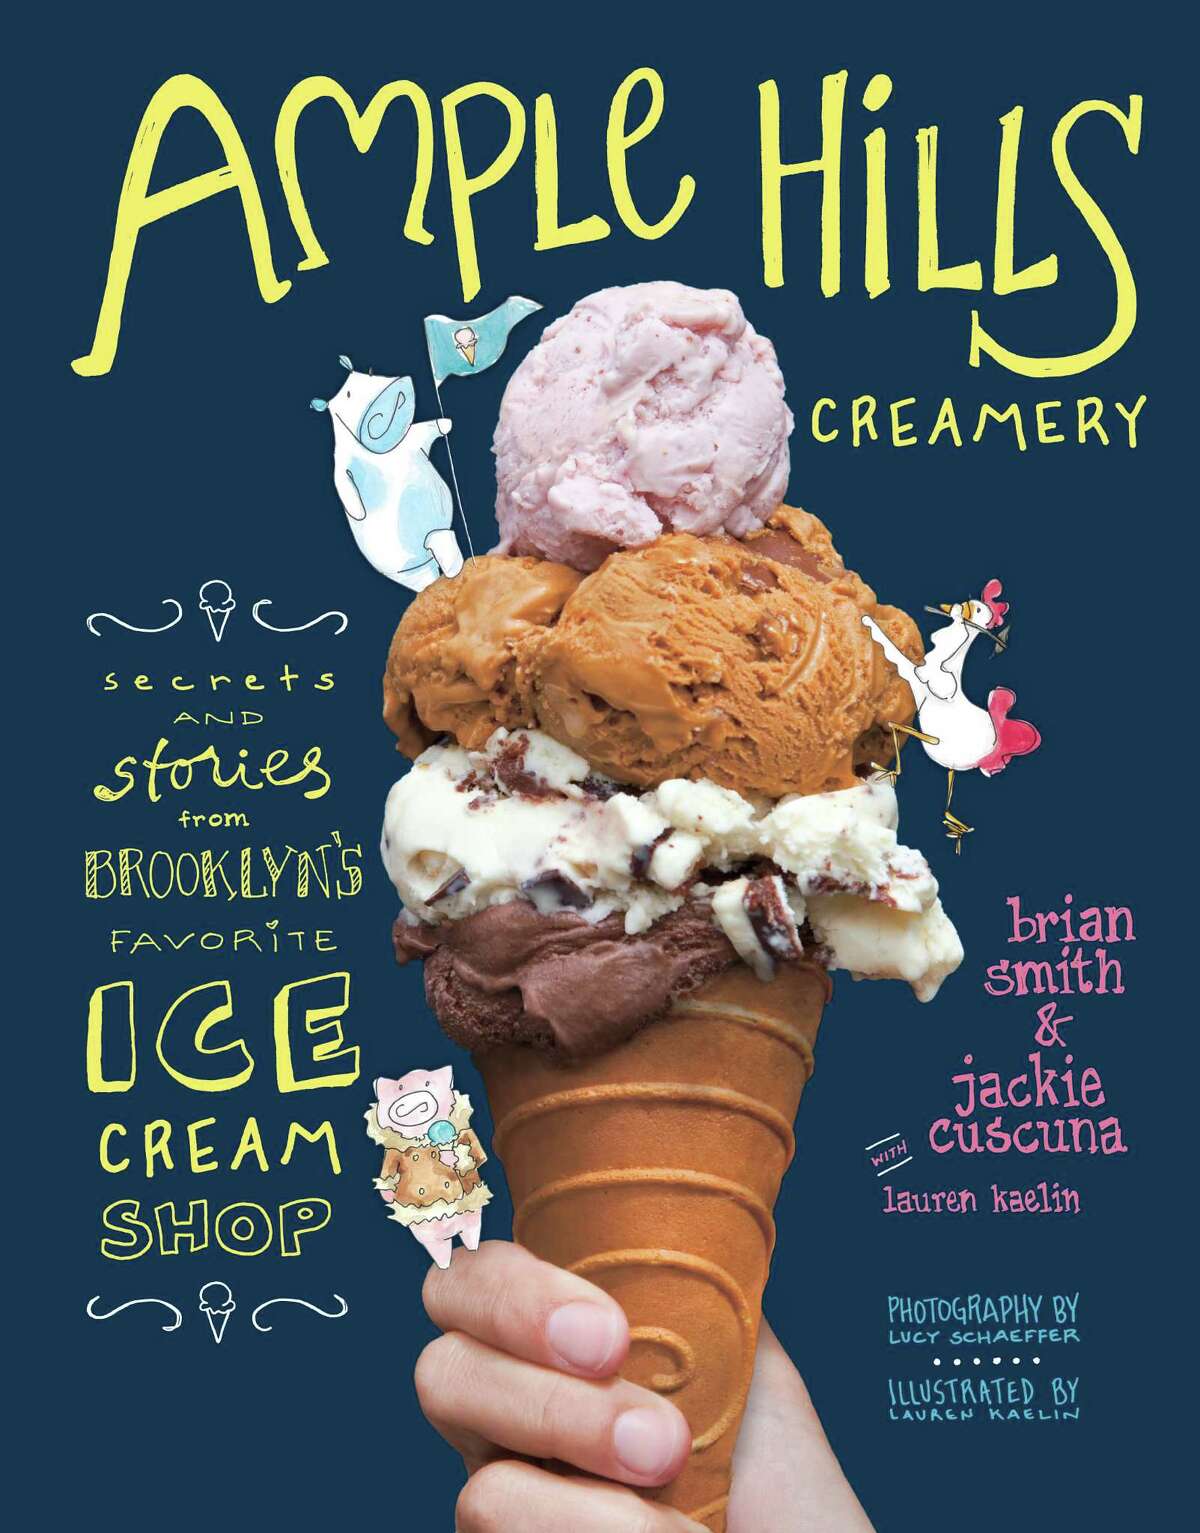 Cover: "Ample Hills Creamery: Secrets and Stories from Brooklyn's Favorite Ice Cream Shop" by Brian Smith and Jackie Cuscuna (Stewart, Tabori & Chang).